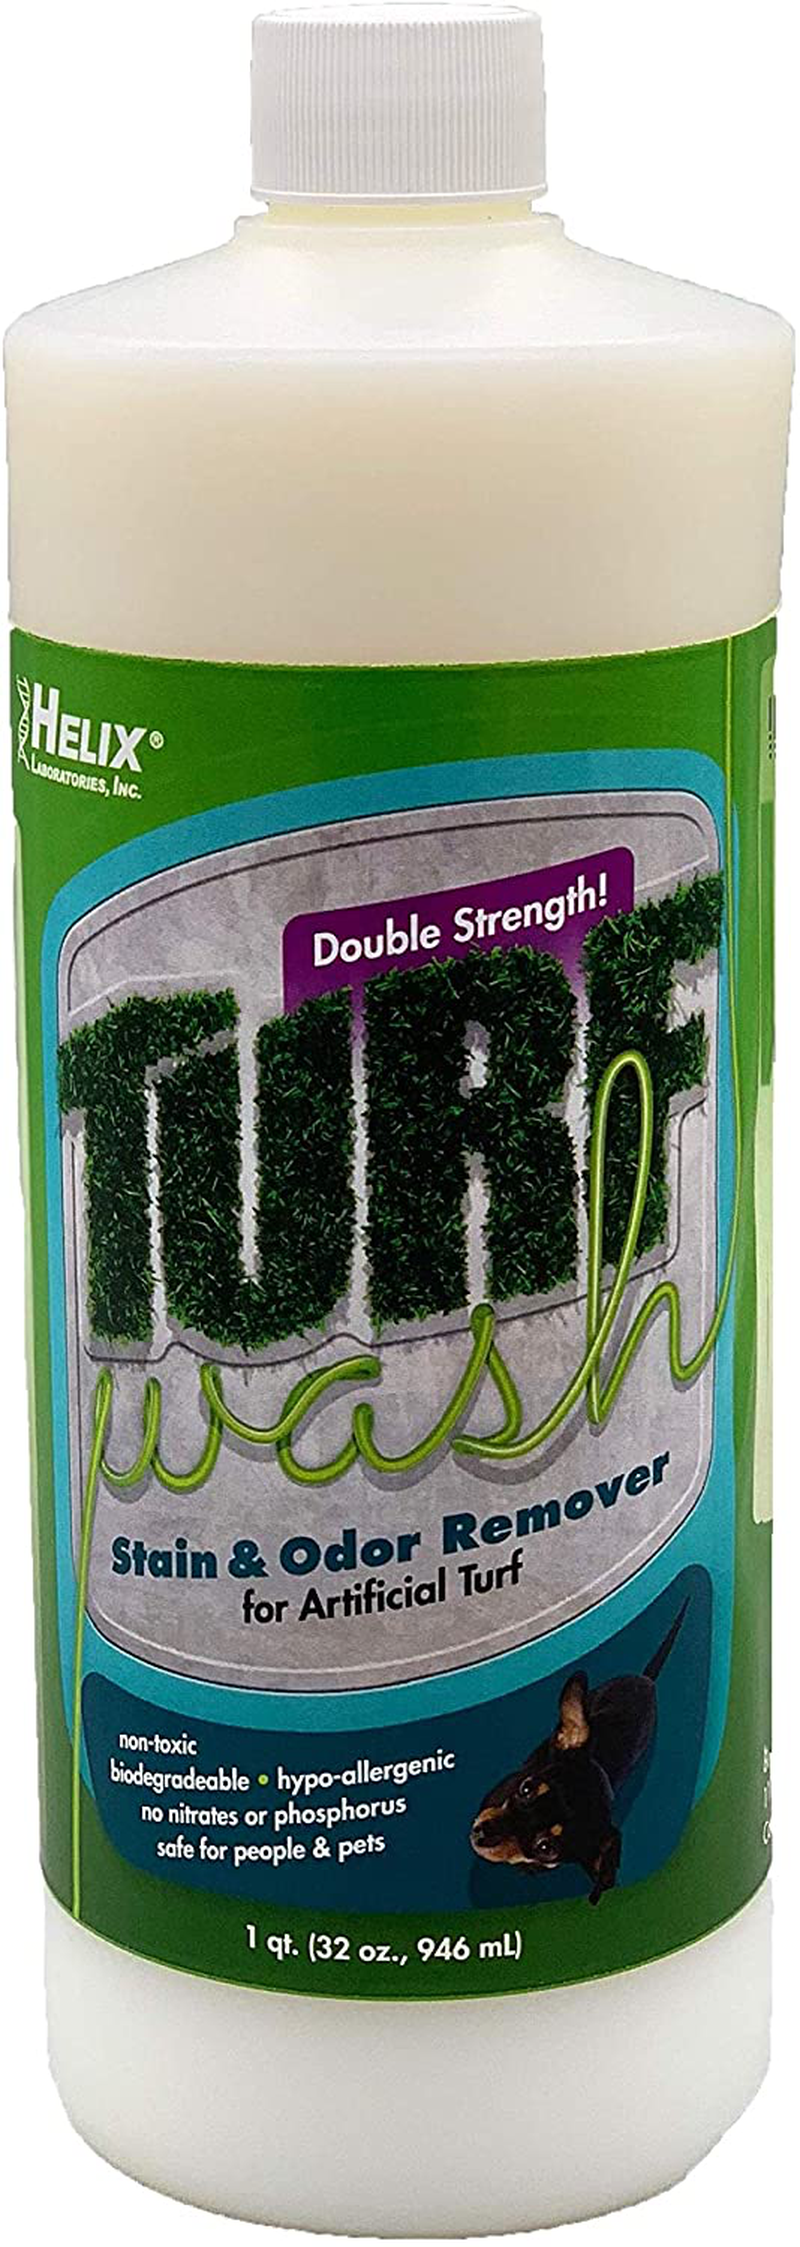 Pet Odor Eliminator and Stain Remover for Artificial Astroturf Patio Carpet Concrete Soil Rubber Matting Synthetic Lawn Kennel Dog Run. Turfwash Enzyme Deodorizer Eliminates Urine Feces Destroys Odors